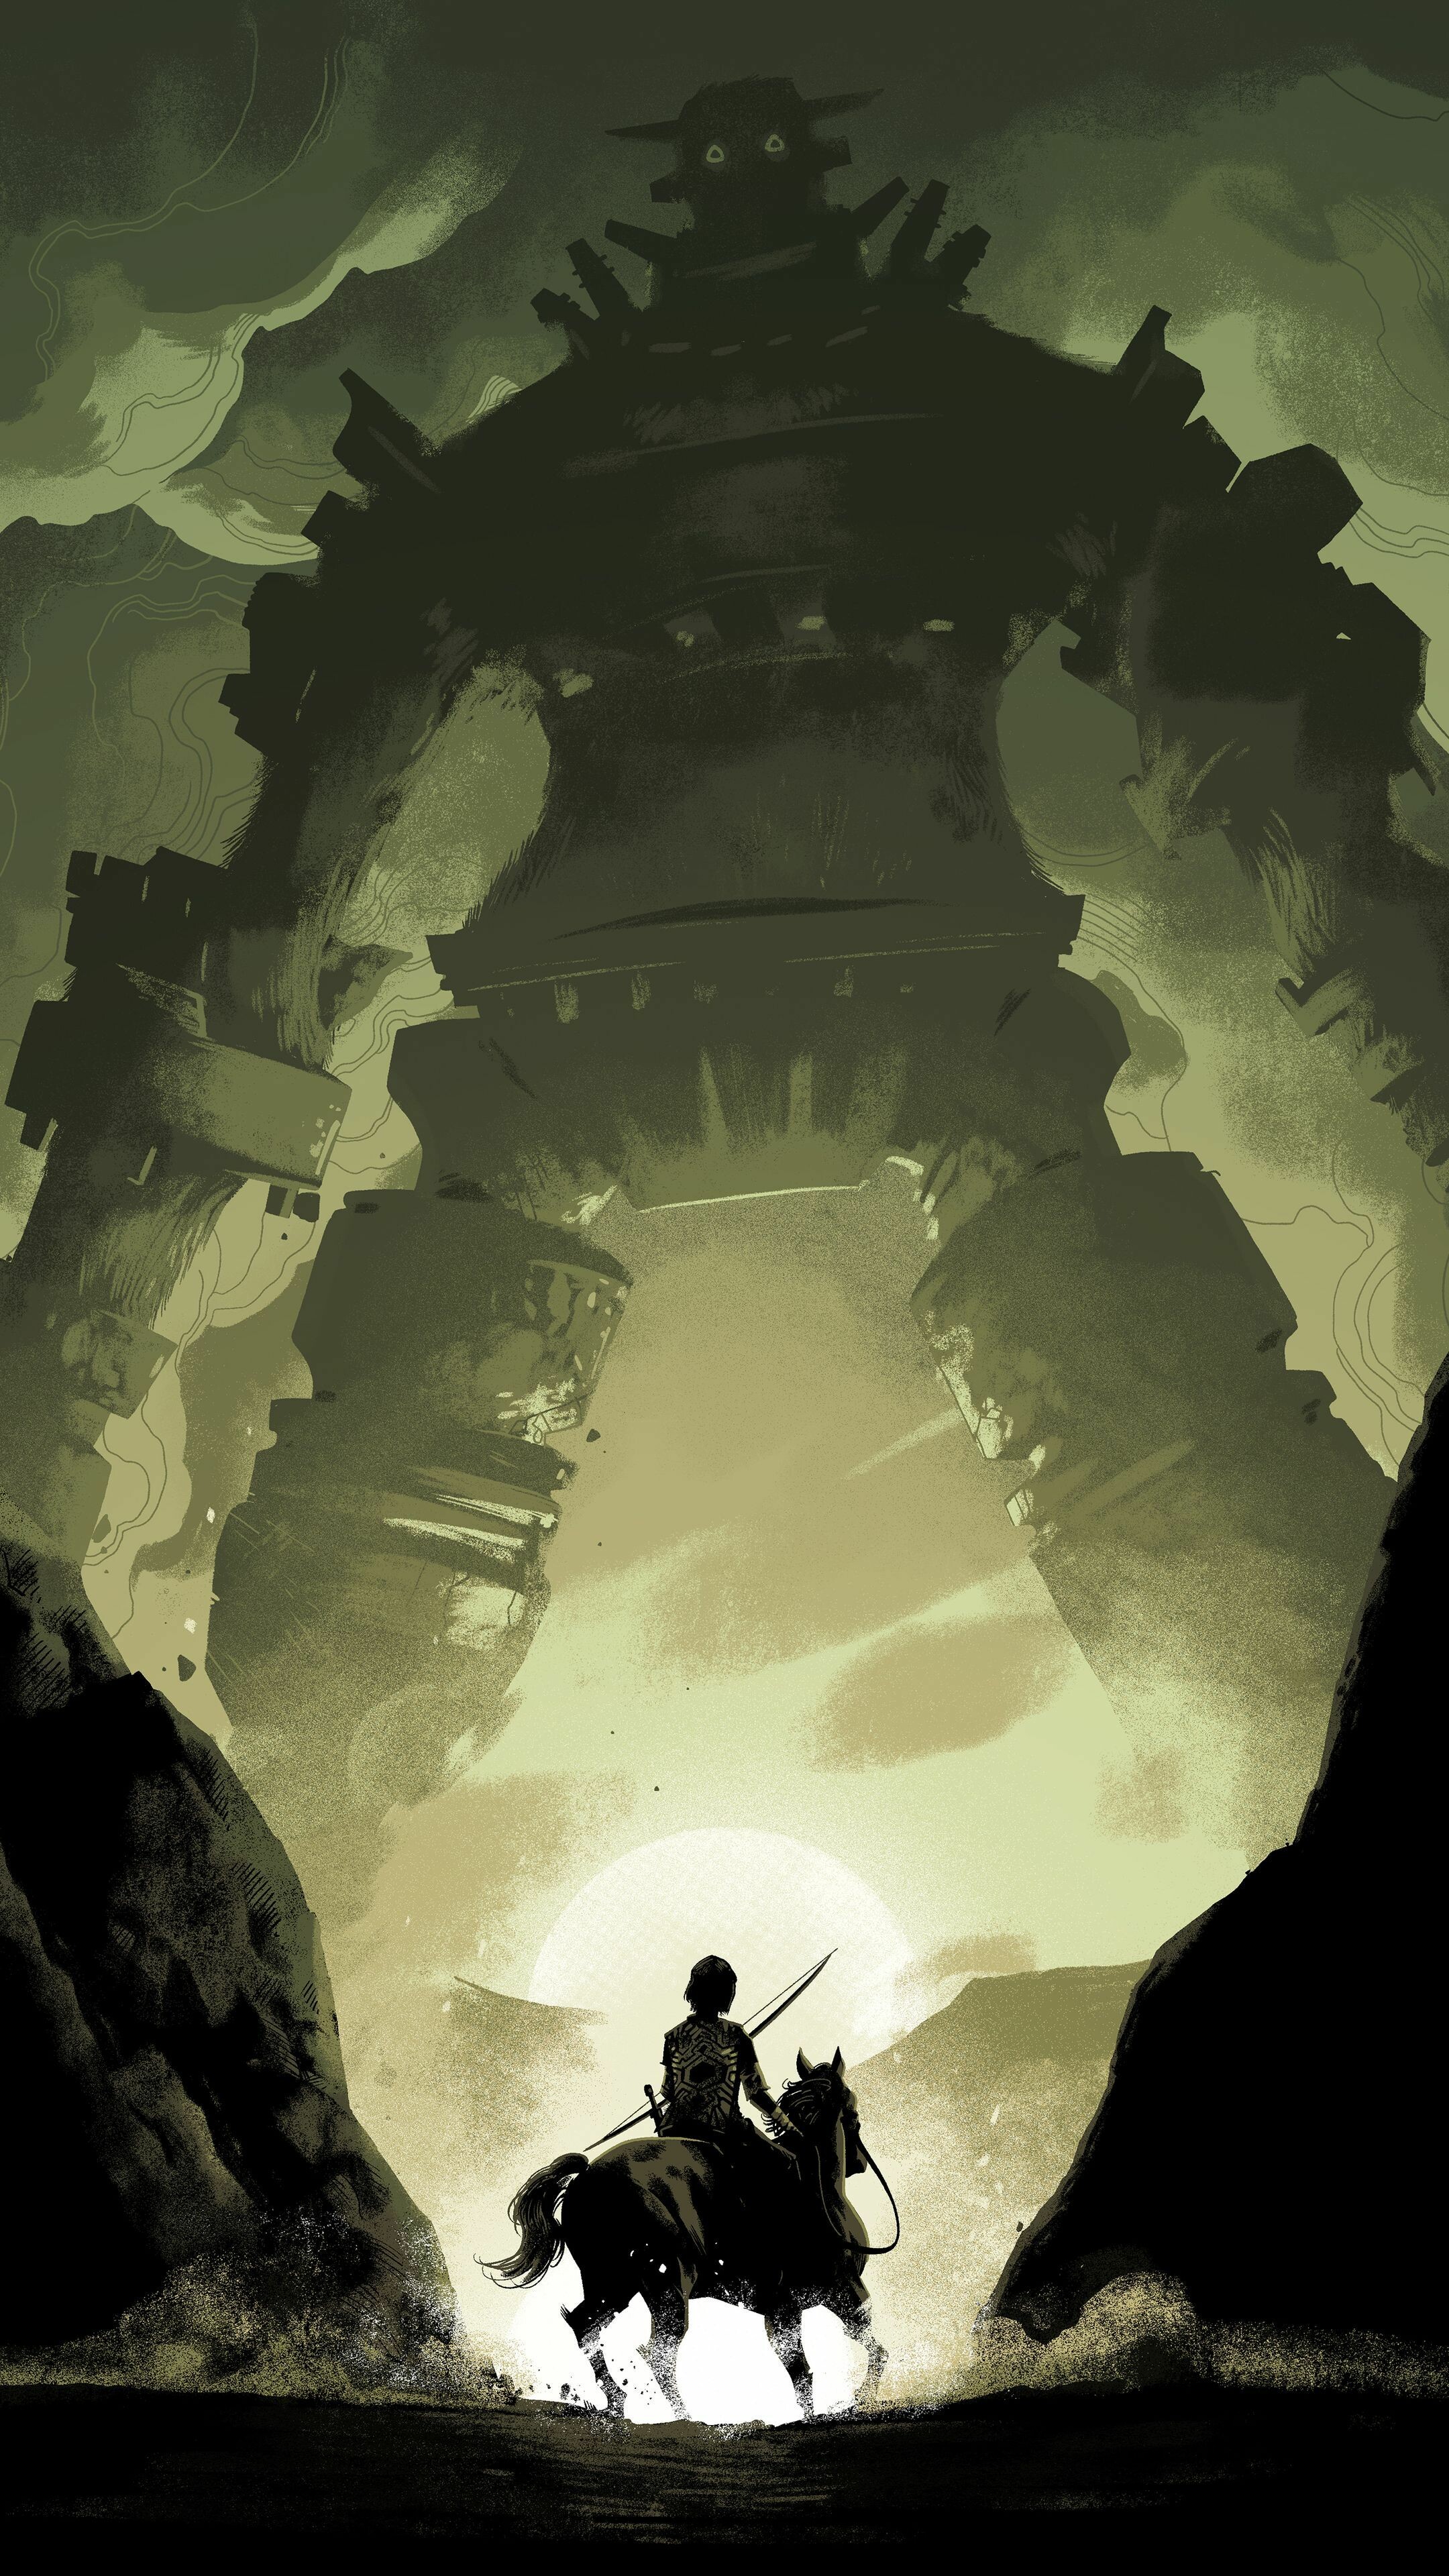 Shadow of the Colossus: The game takes place in a fantasy world known as the Forbidden Land. 2160x3840 4K Wallpaper.